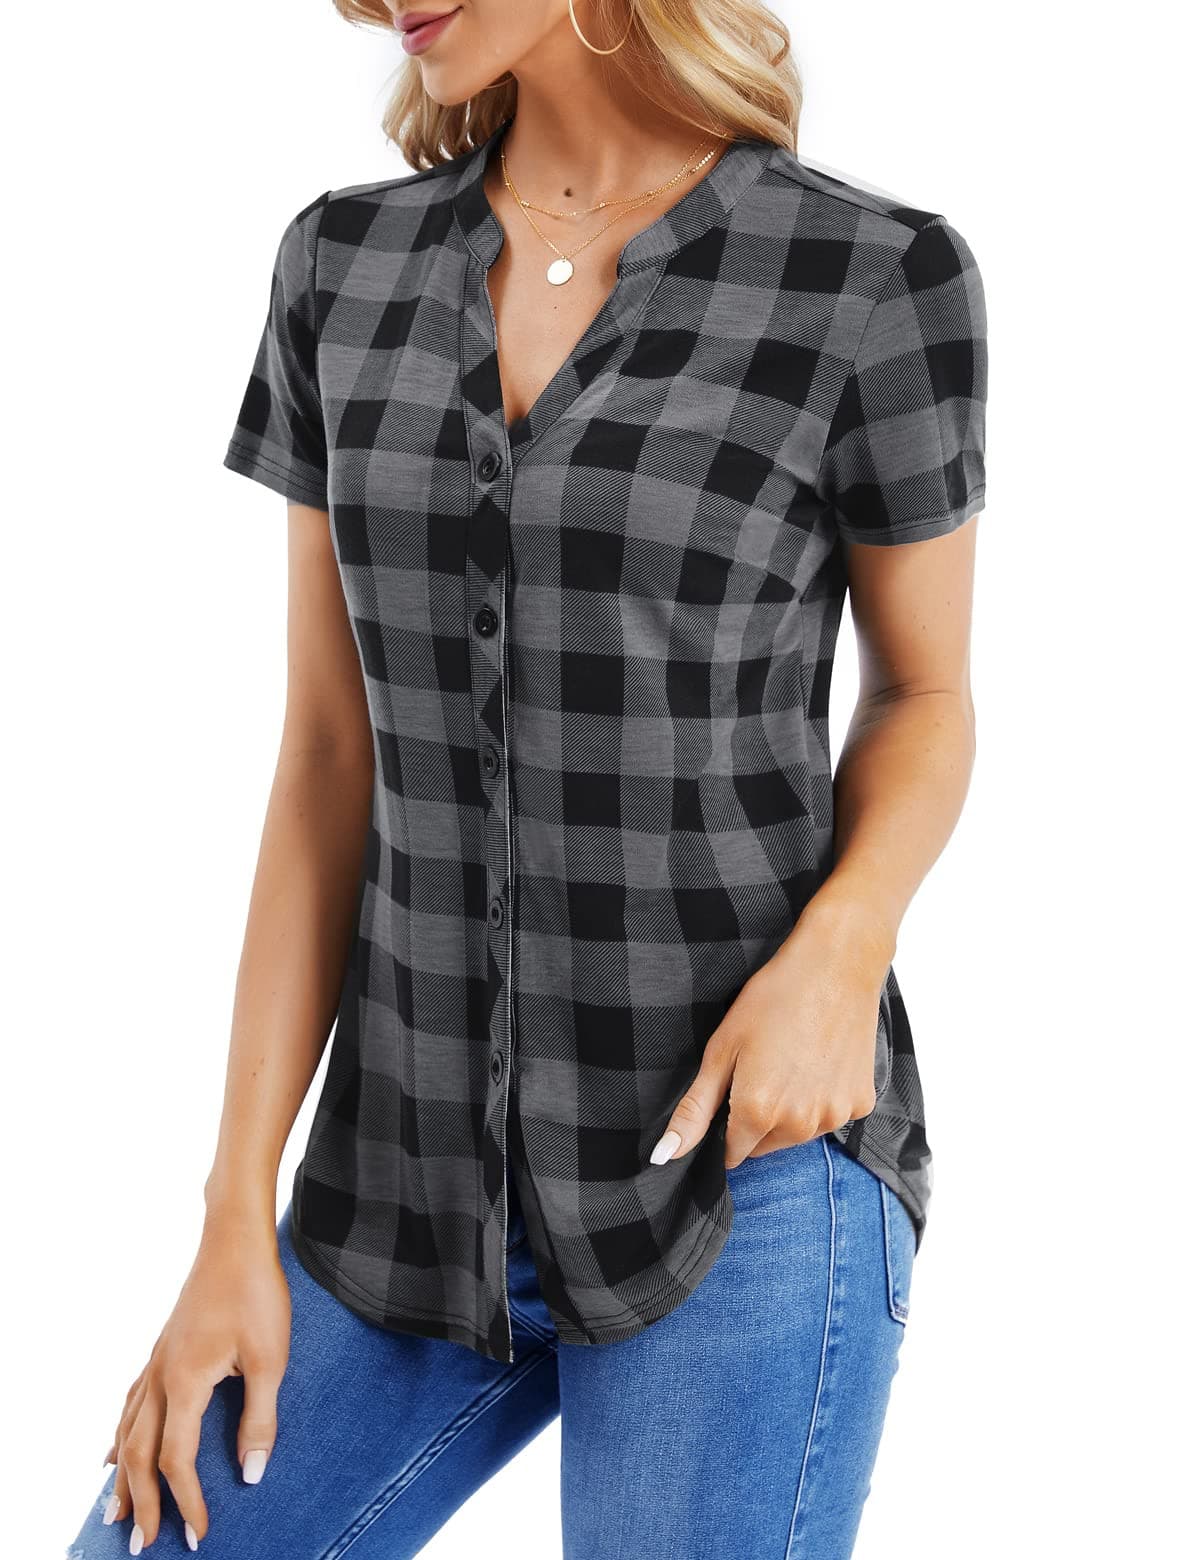 DJT Short Sleeve Black and White Plaid Women's Summer Casual V Neck Blouses Plaid Button Down Plaid Shirts Tops